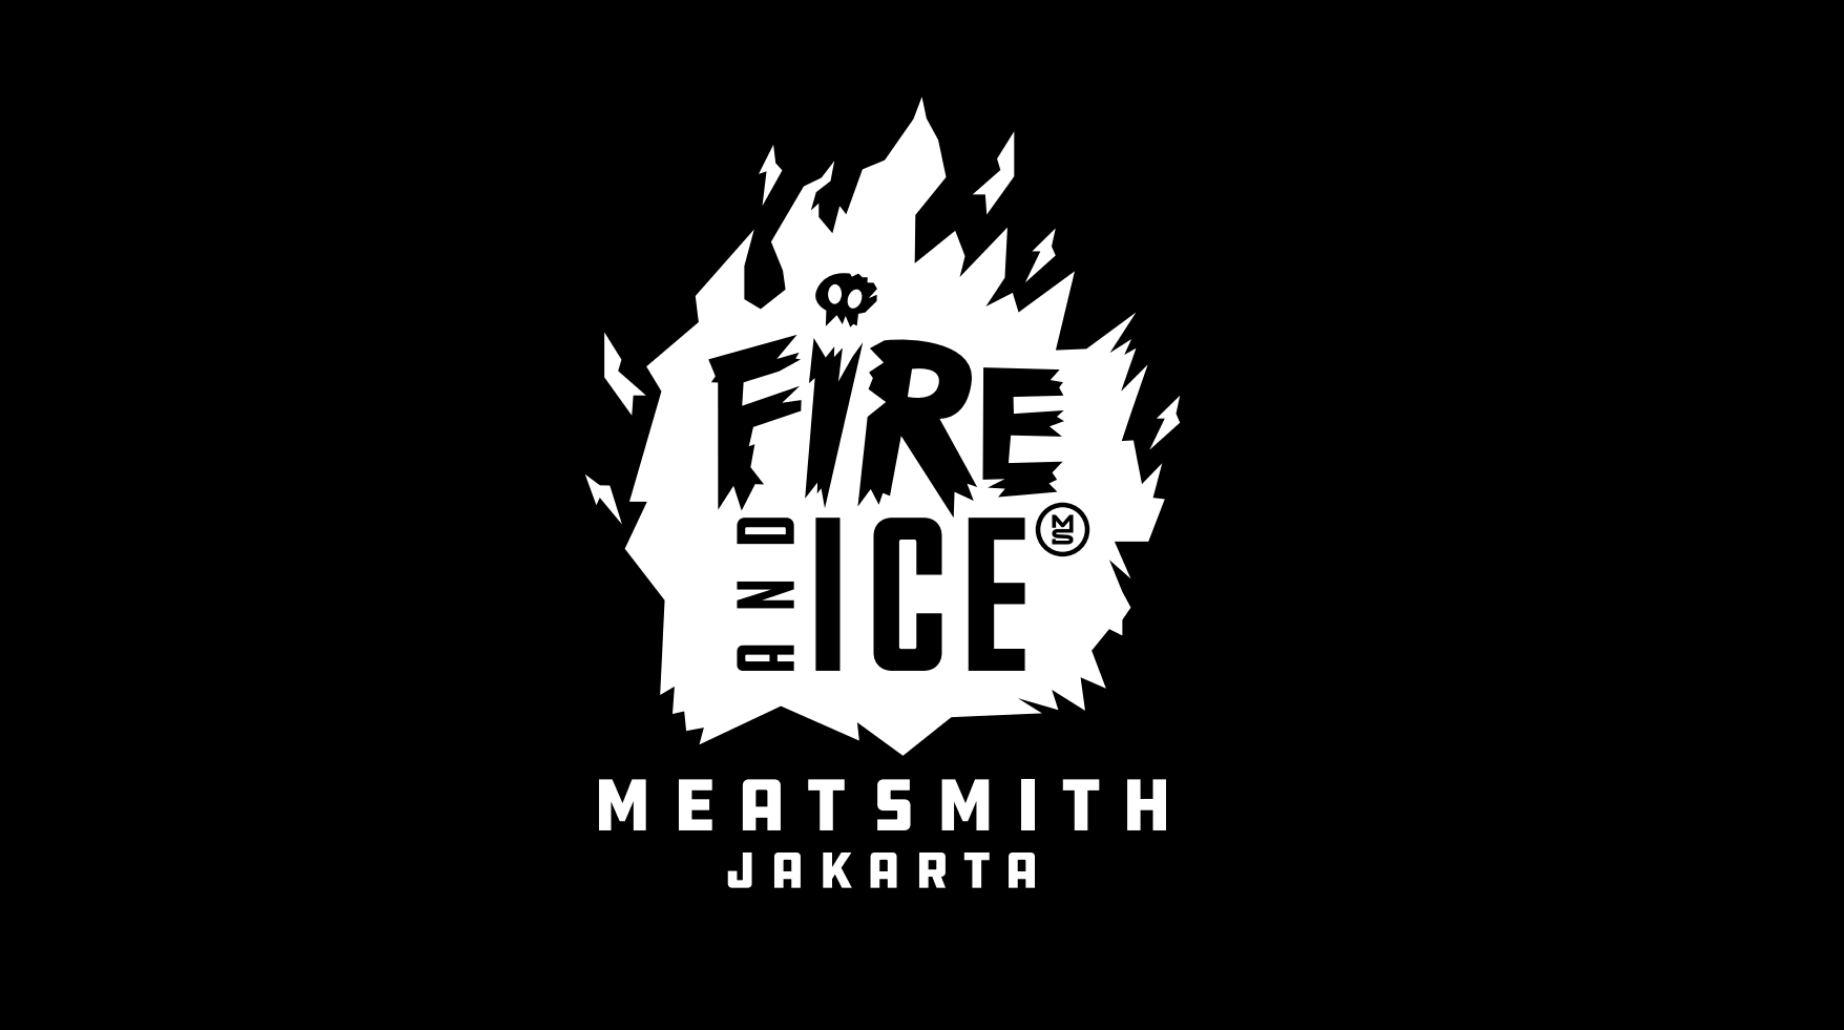 Meat Smith Jakarta: Fire & Ice Event